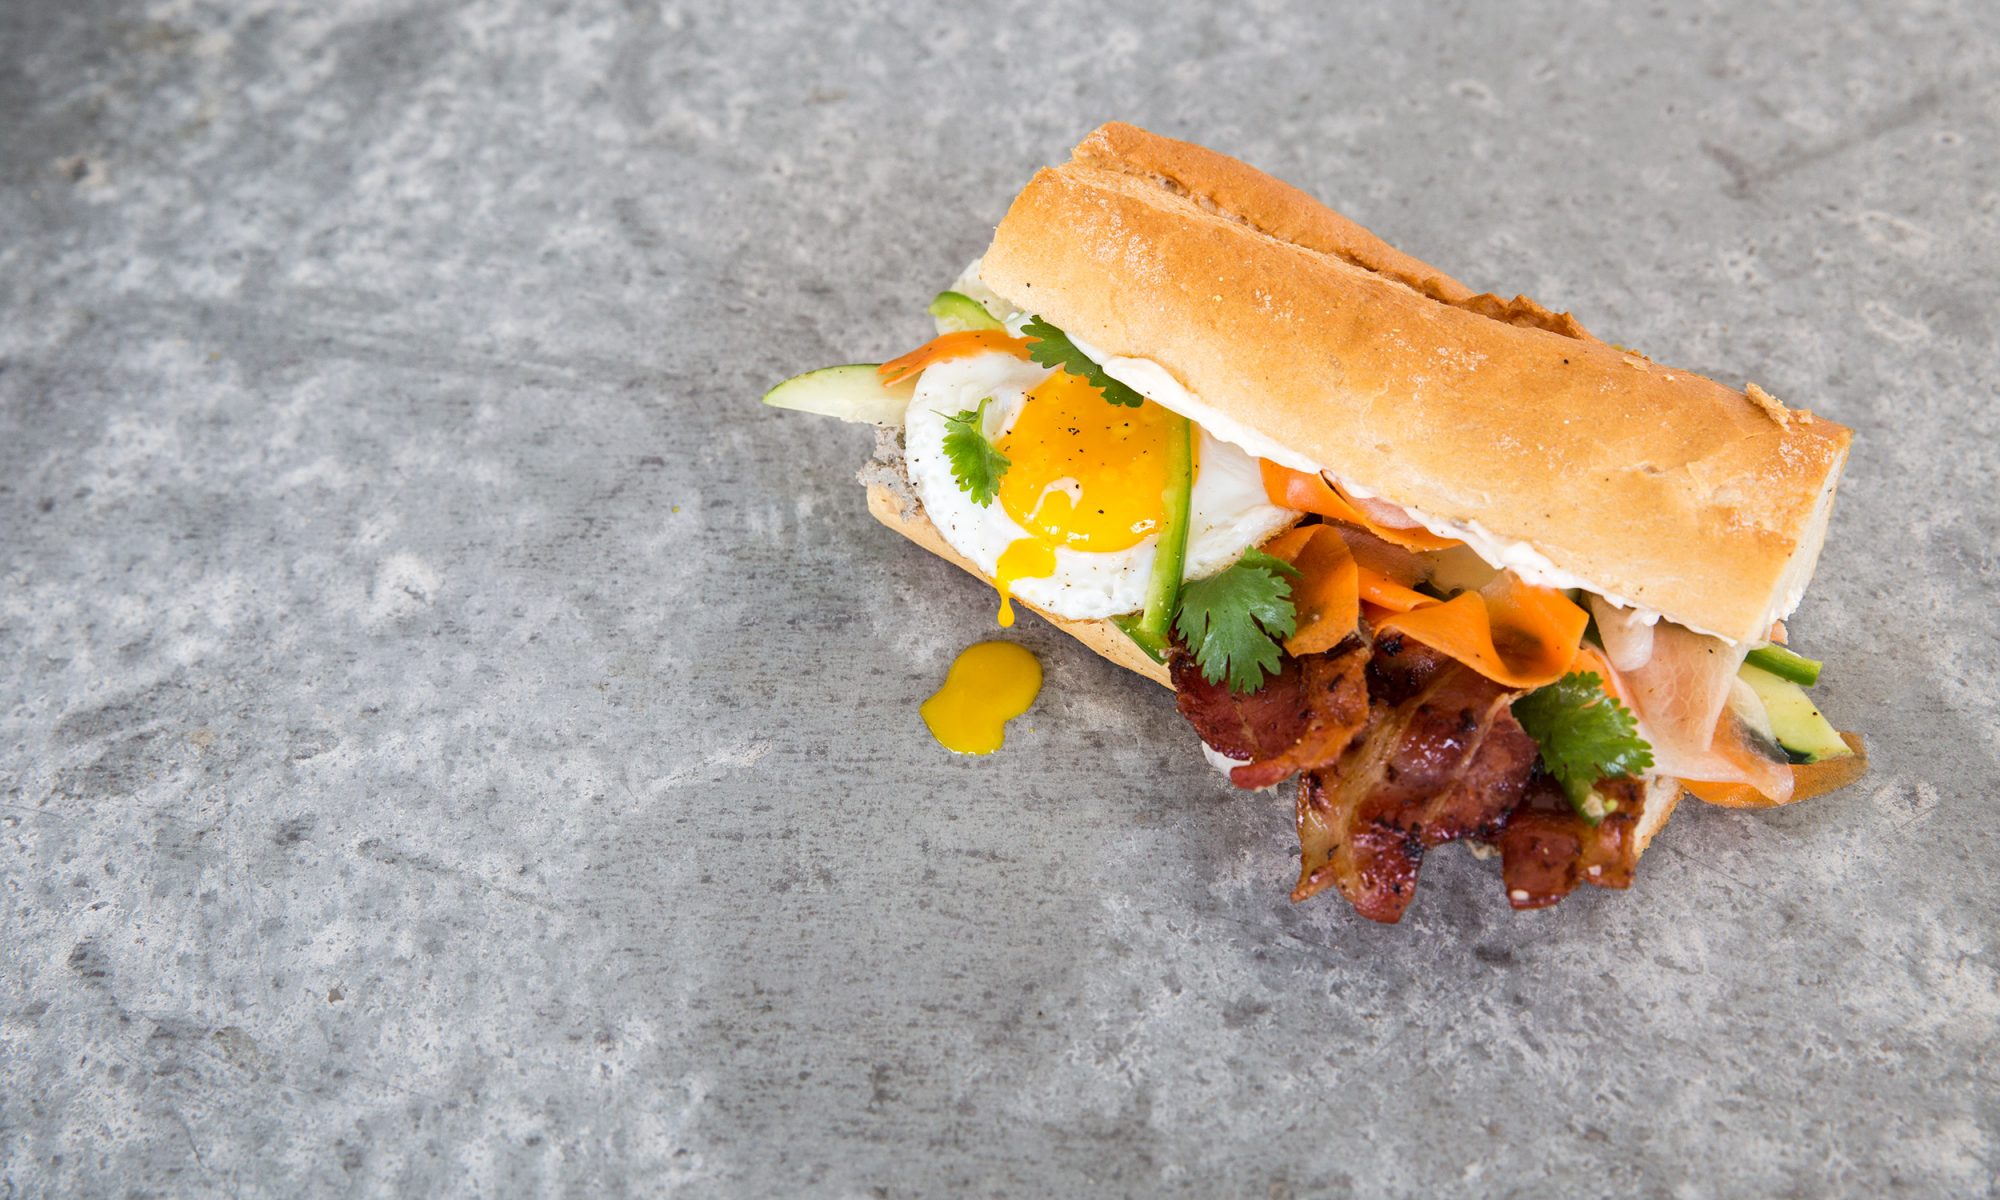 EC: This Breakfast B&aacute;nh M&igrave; Starts Your Day Off Spicy